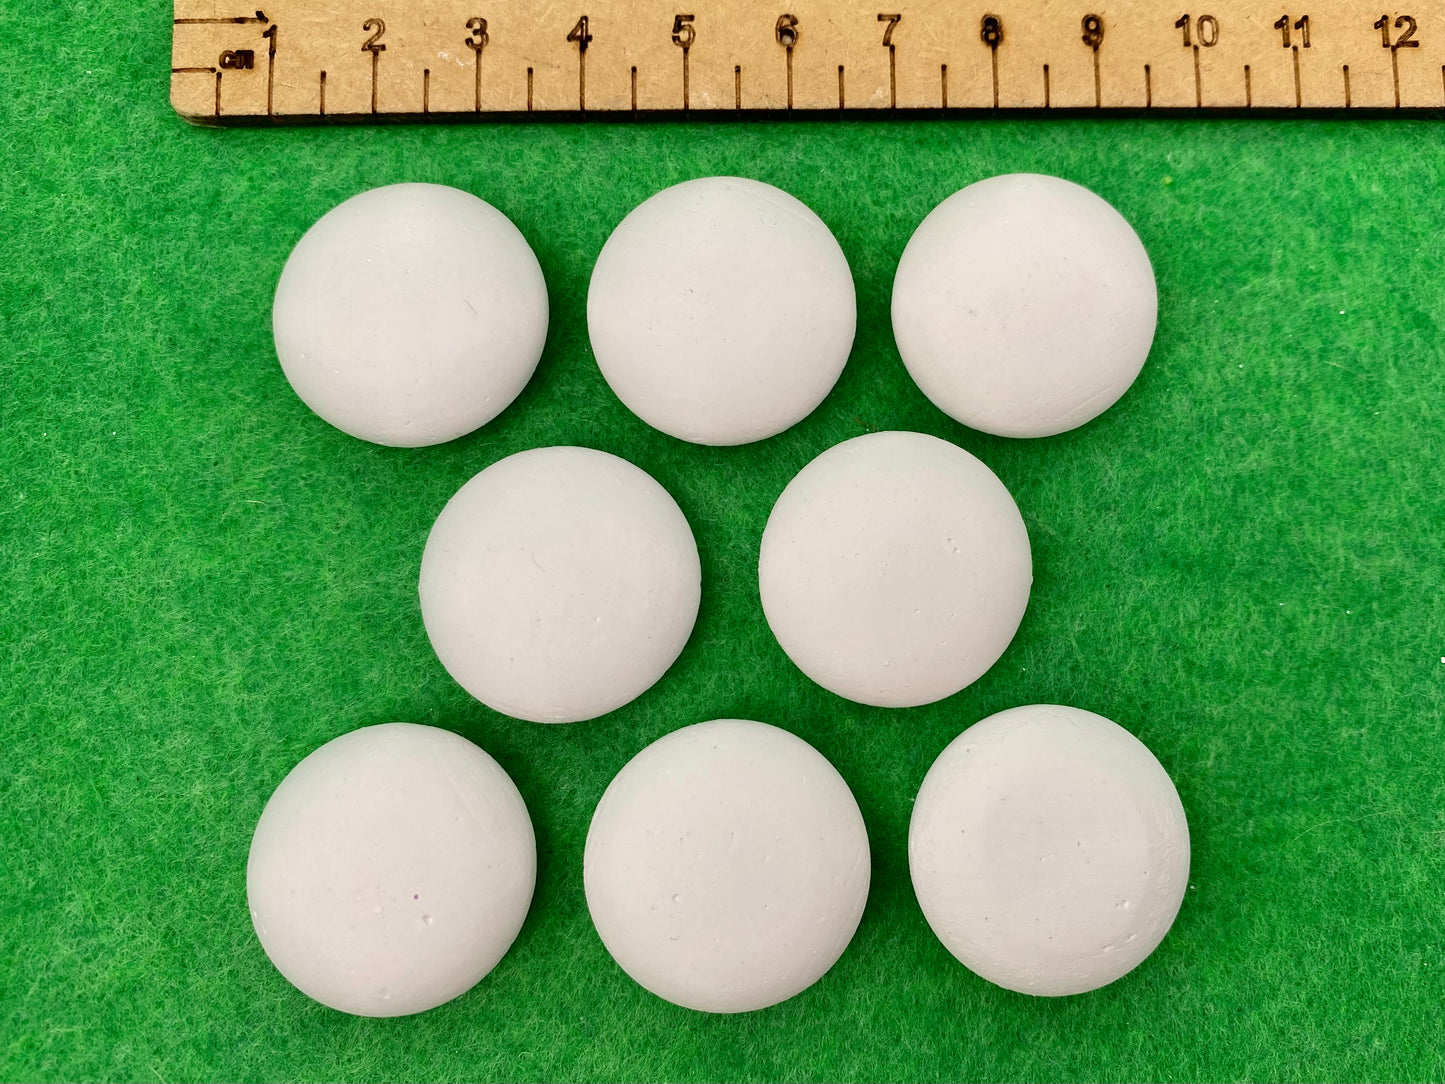 8 tiny white circular plaster pebbles next to a ruler